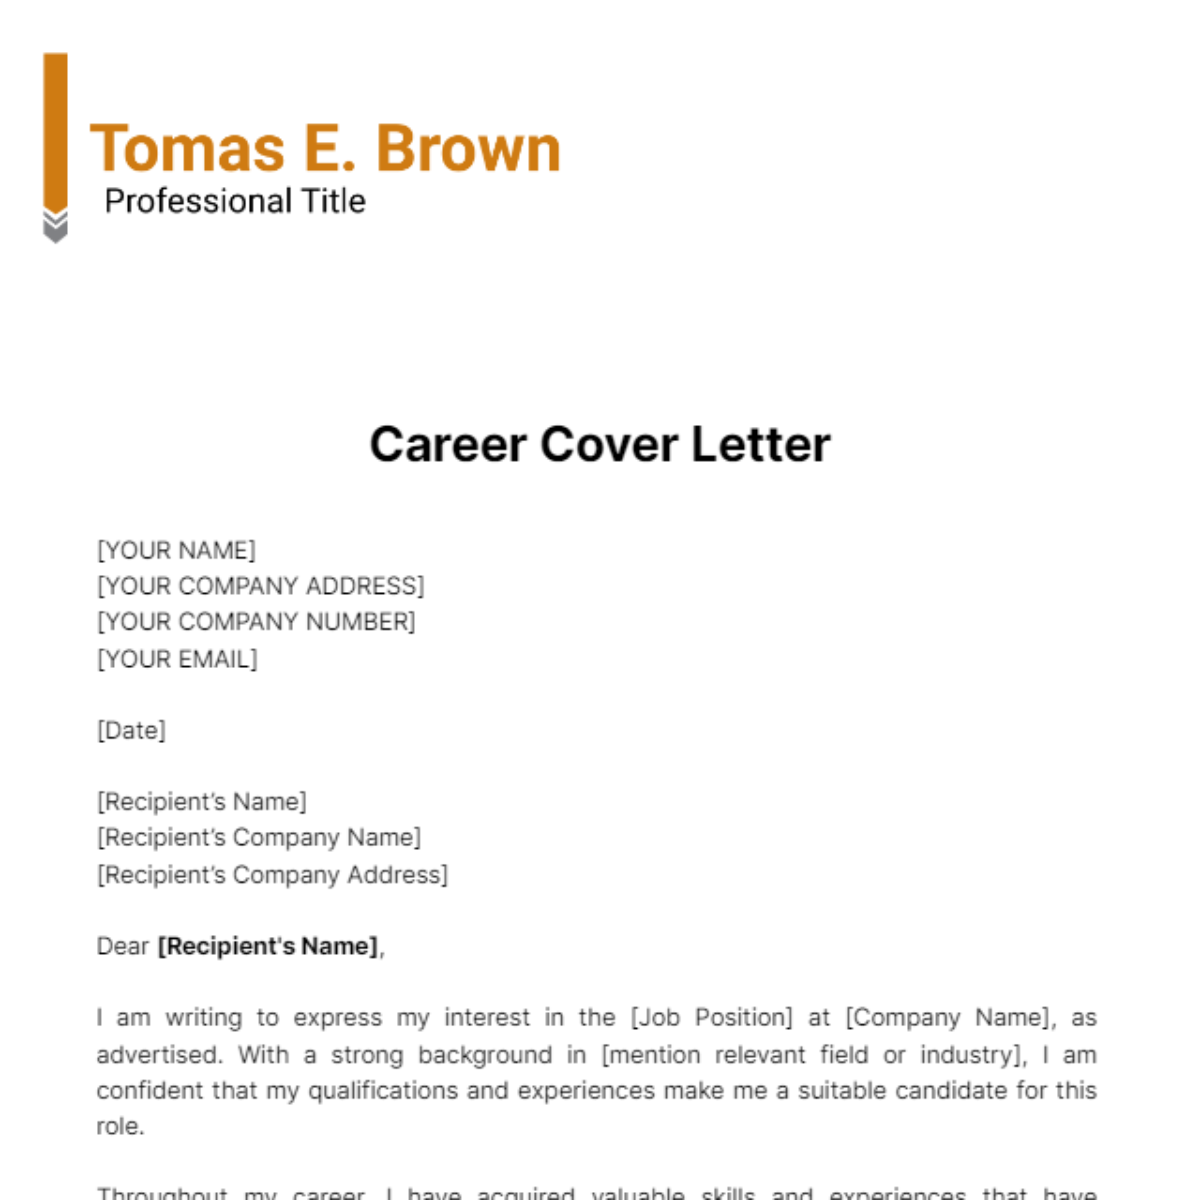 Career Cover Letter Template